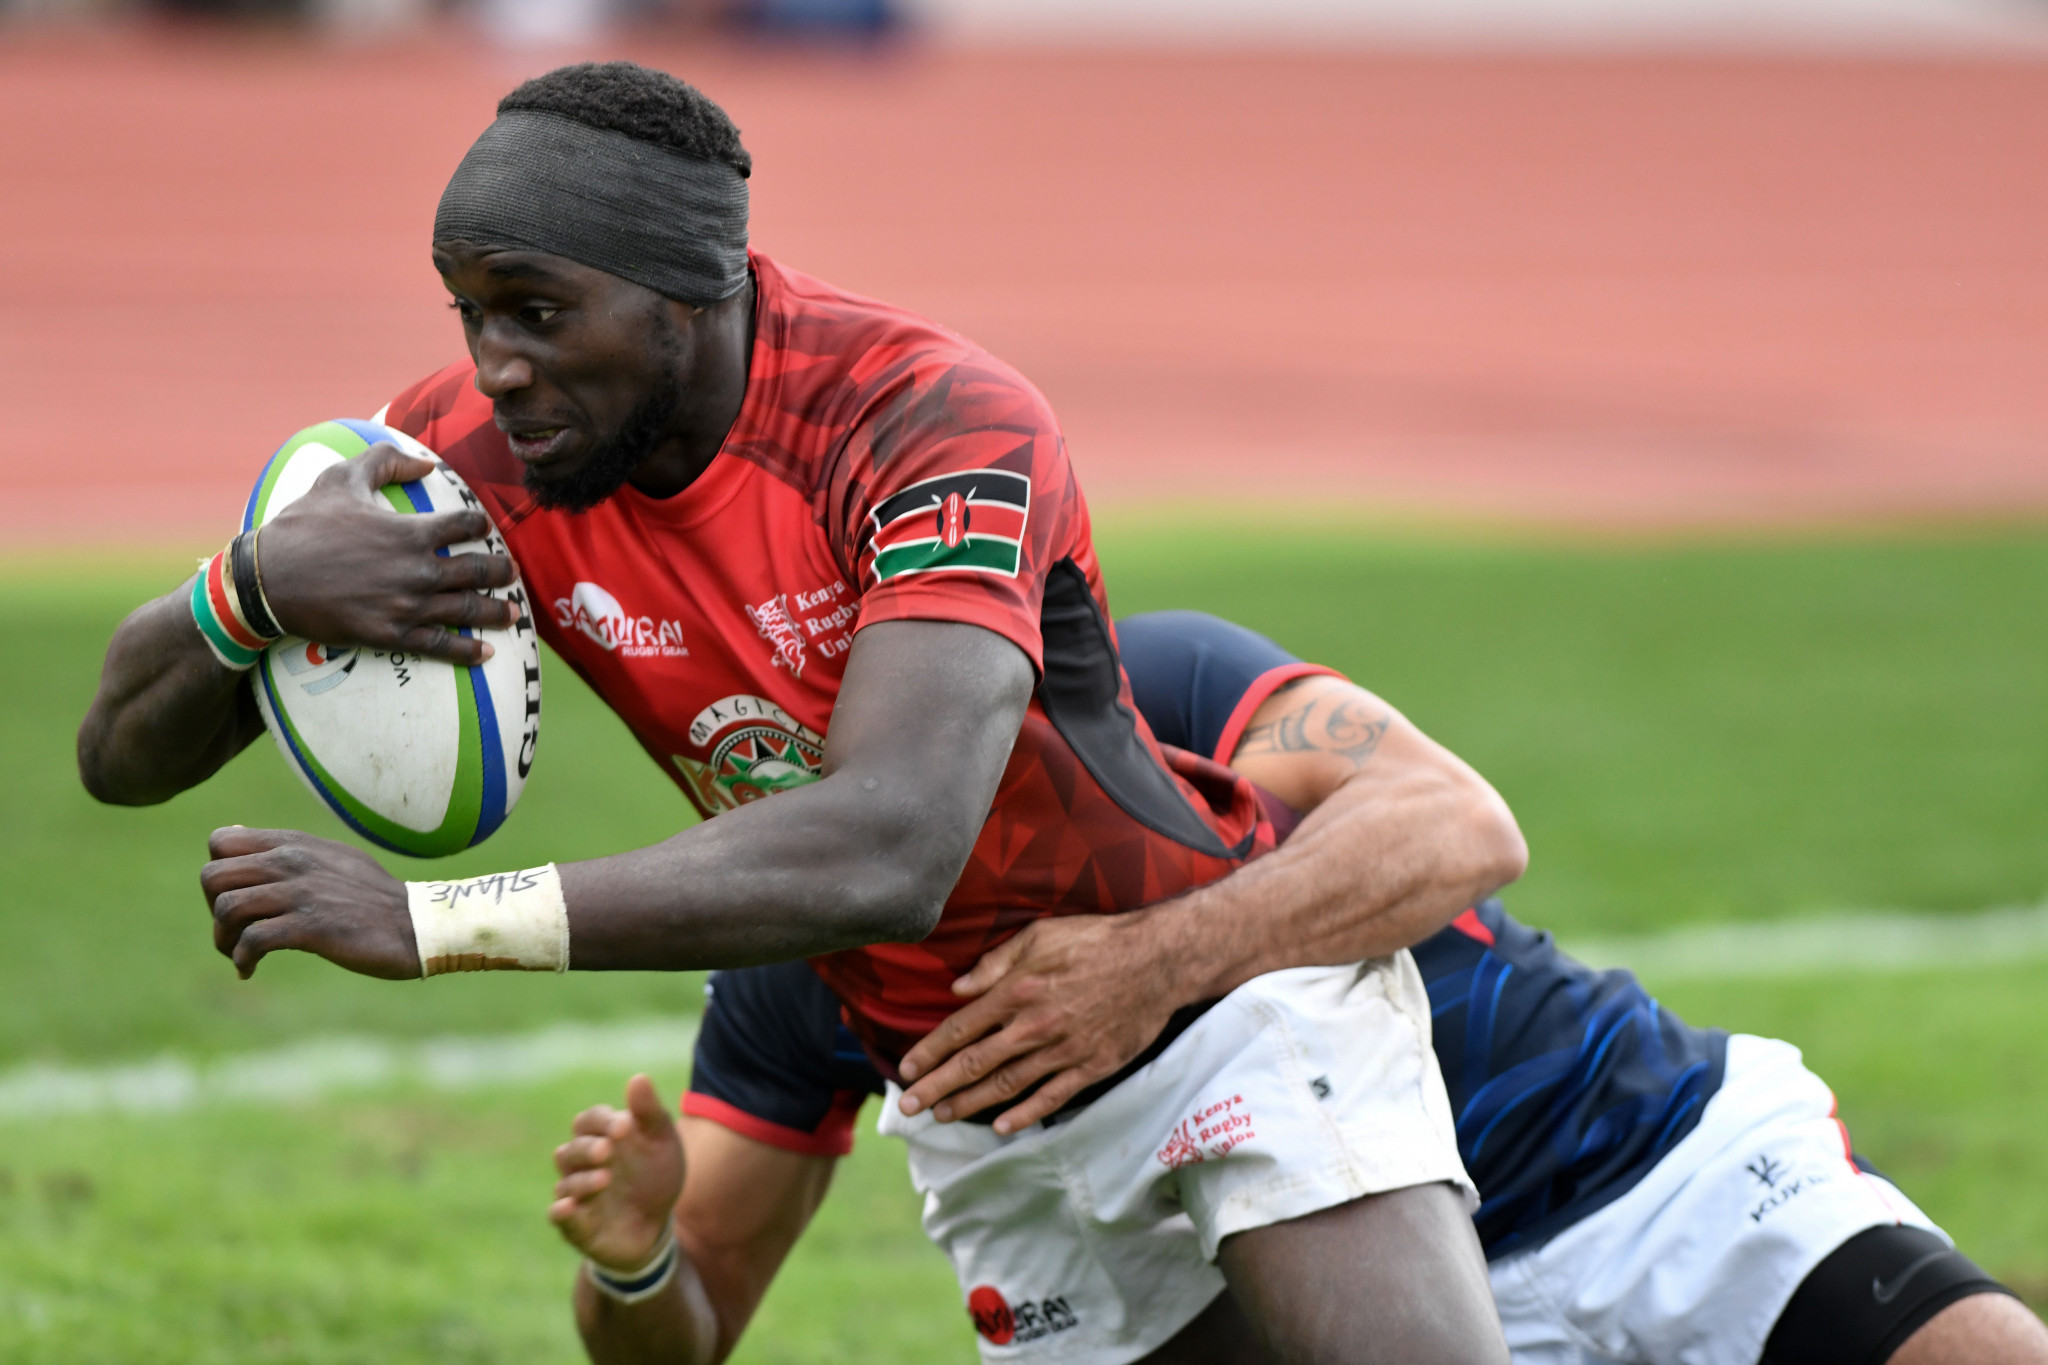 Kenya Rugby Union announced the cancellation of the 2019-2020 season due to the coronavirus pandemic ©Getty Images